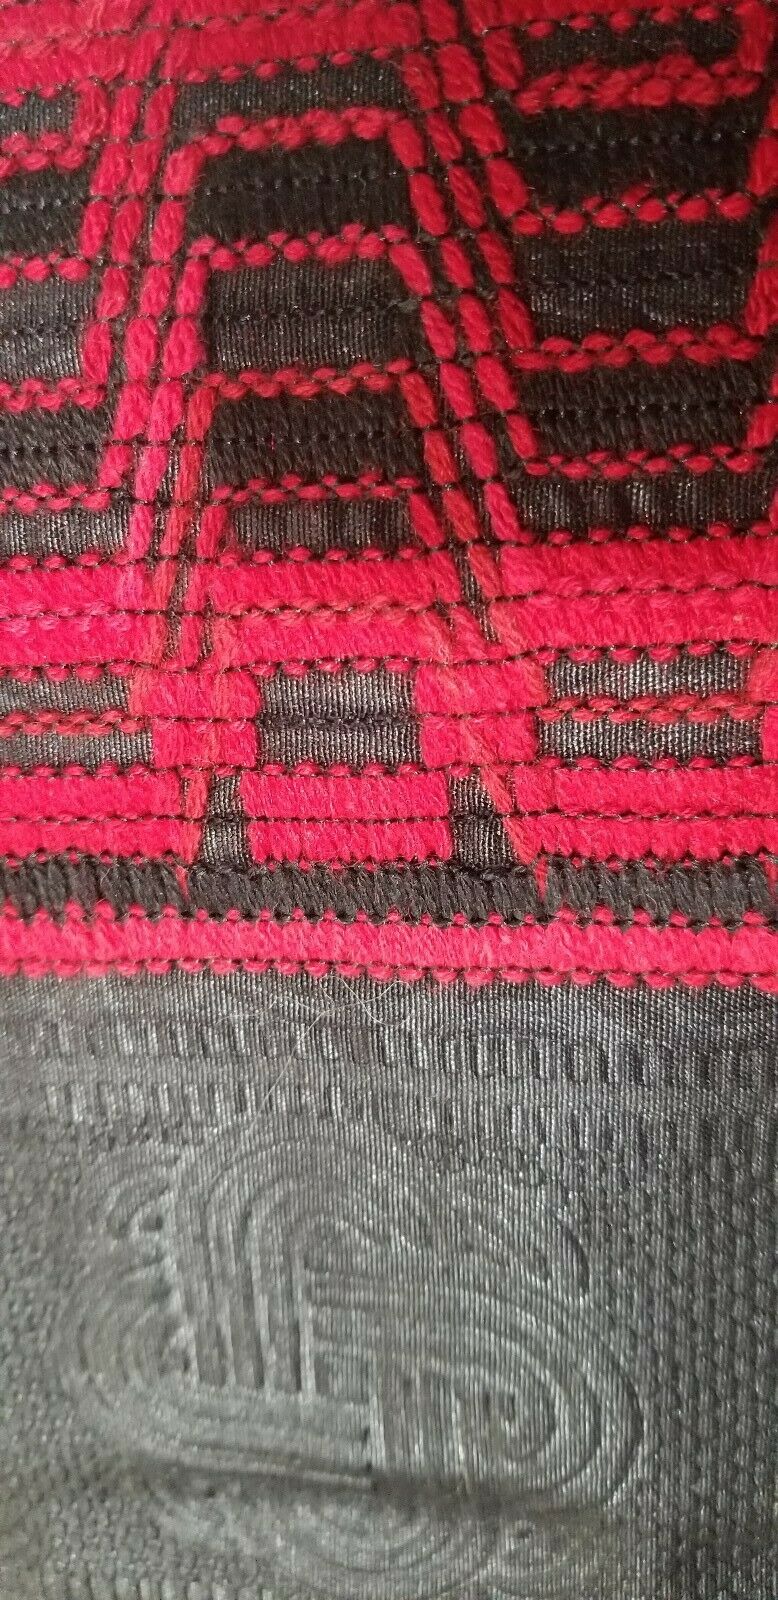 DESIGNER AFRICAN PRINT IN BLACK & RED with ADINKRA CLOTH 2yds